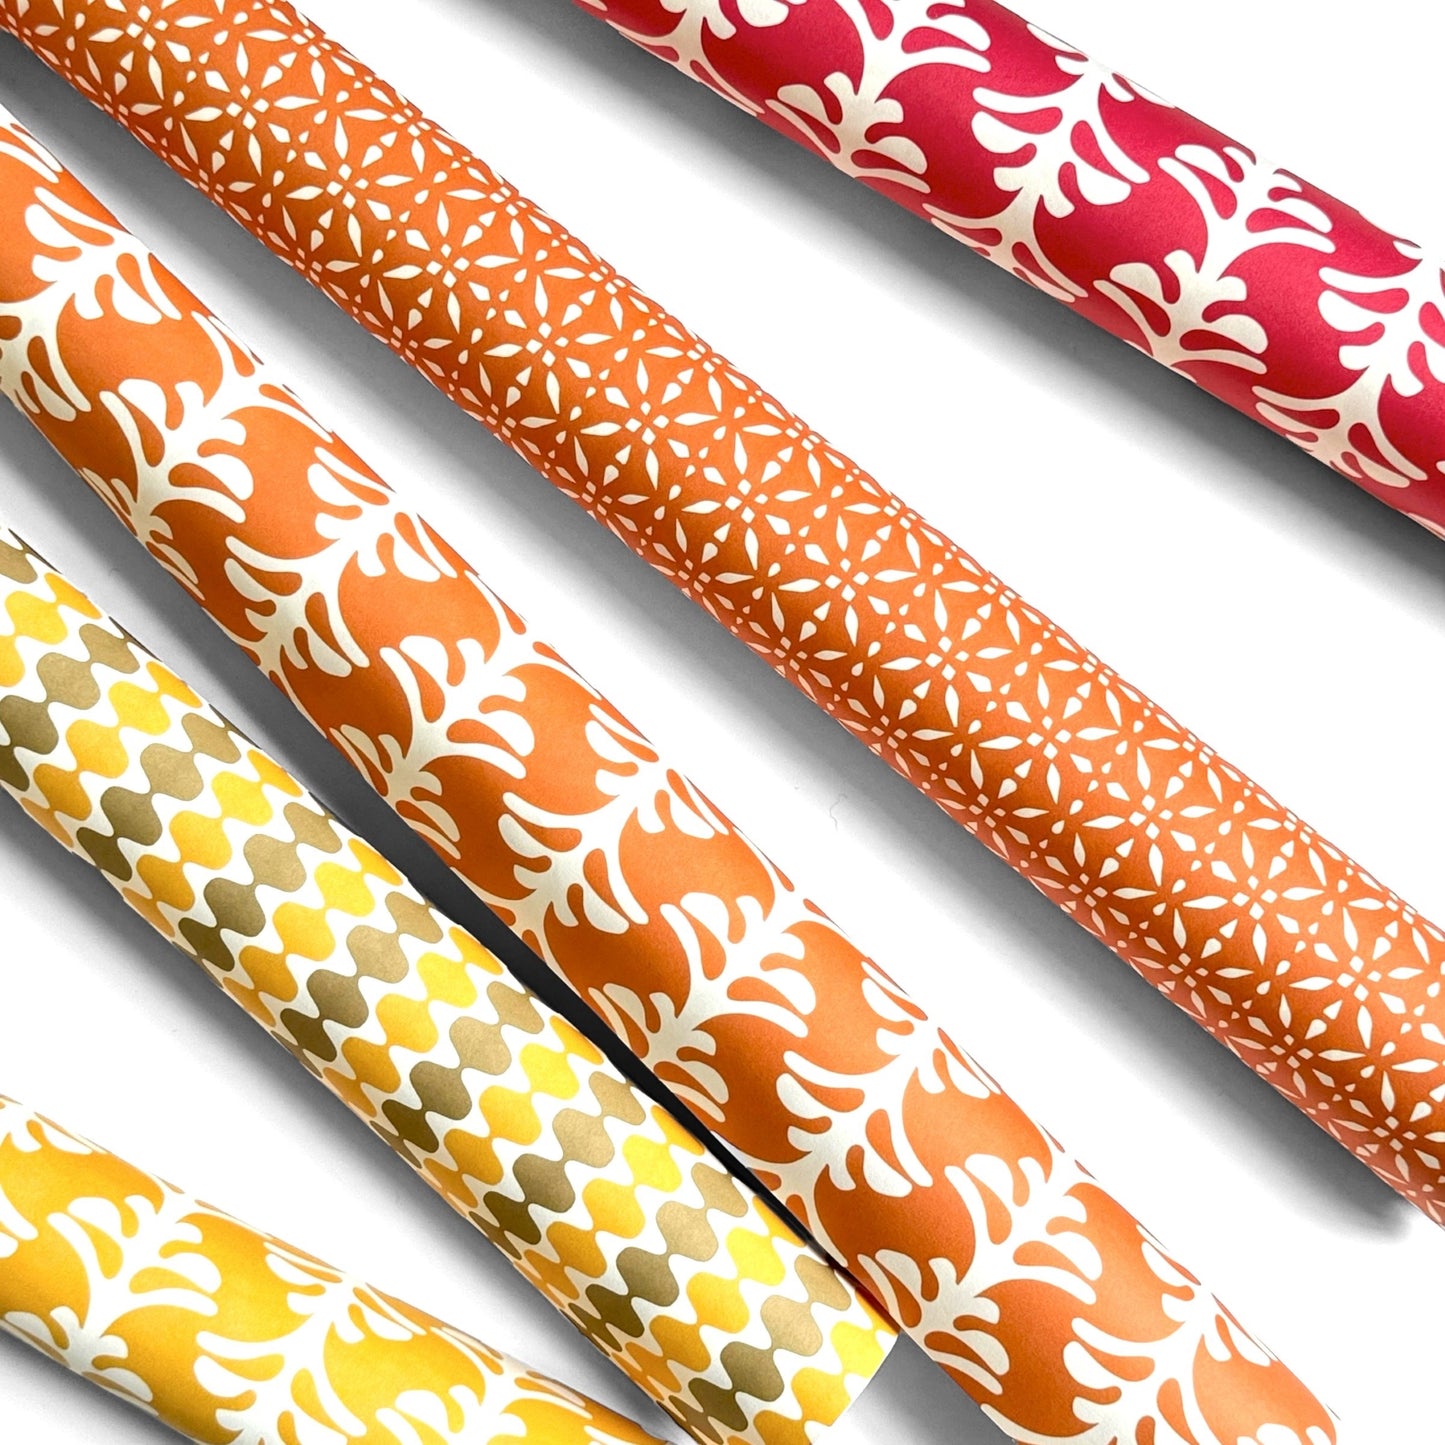 wrapping paper by Otto Editions with a cut-out design in white on a spice orange background. Pictured rolled alongside other designs